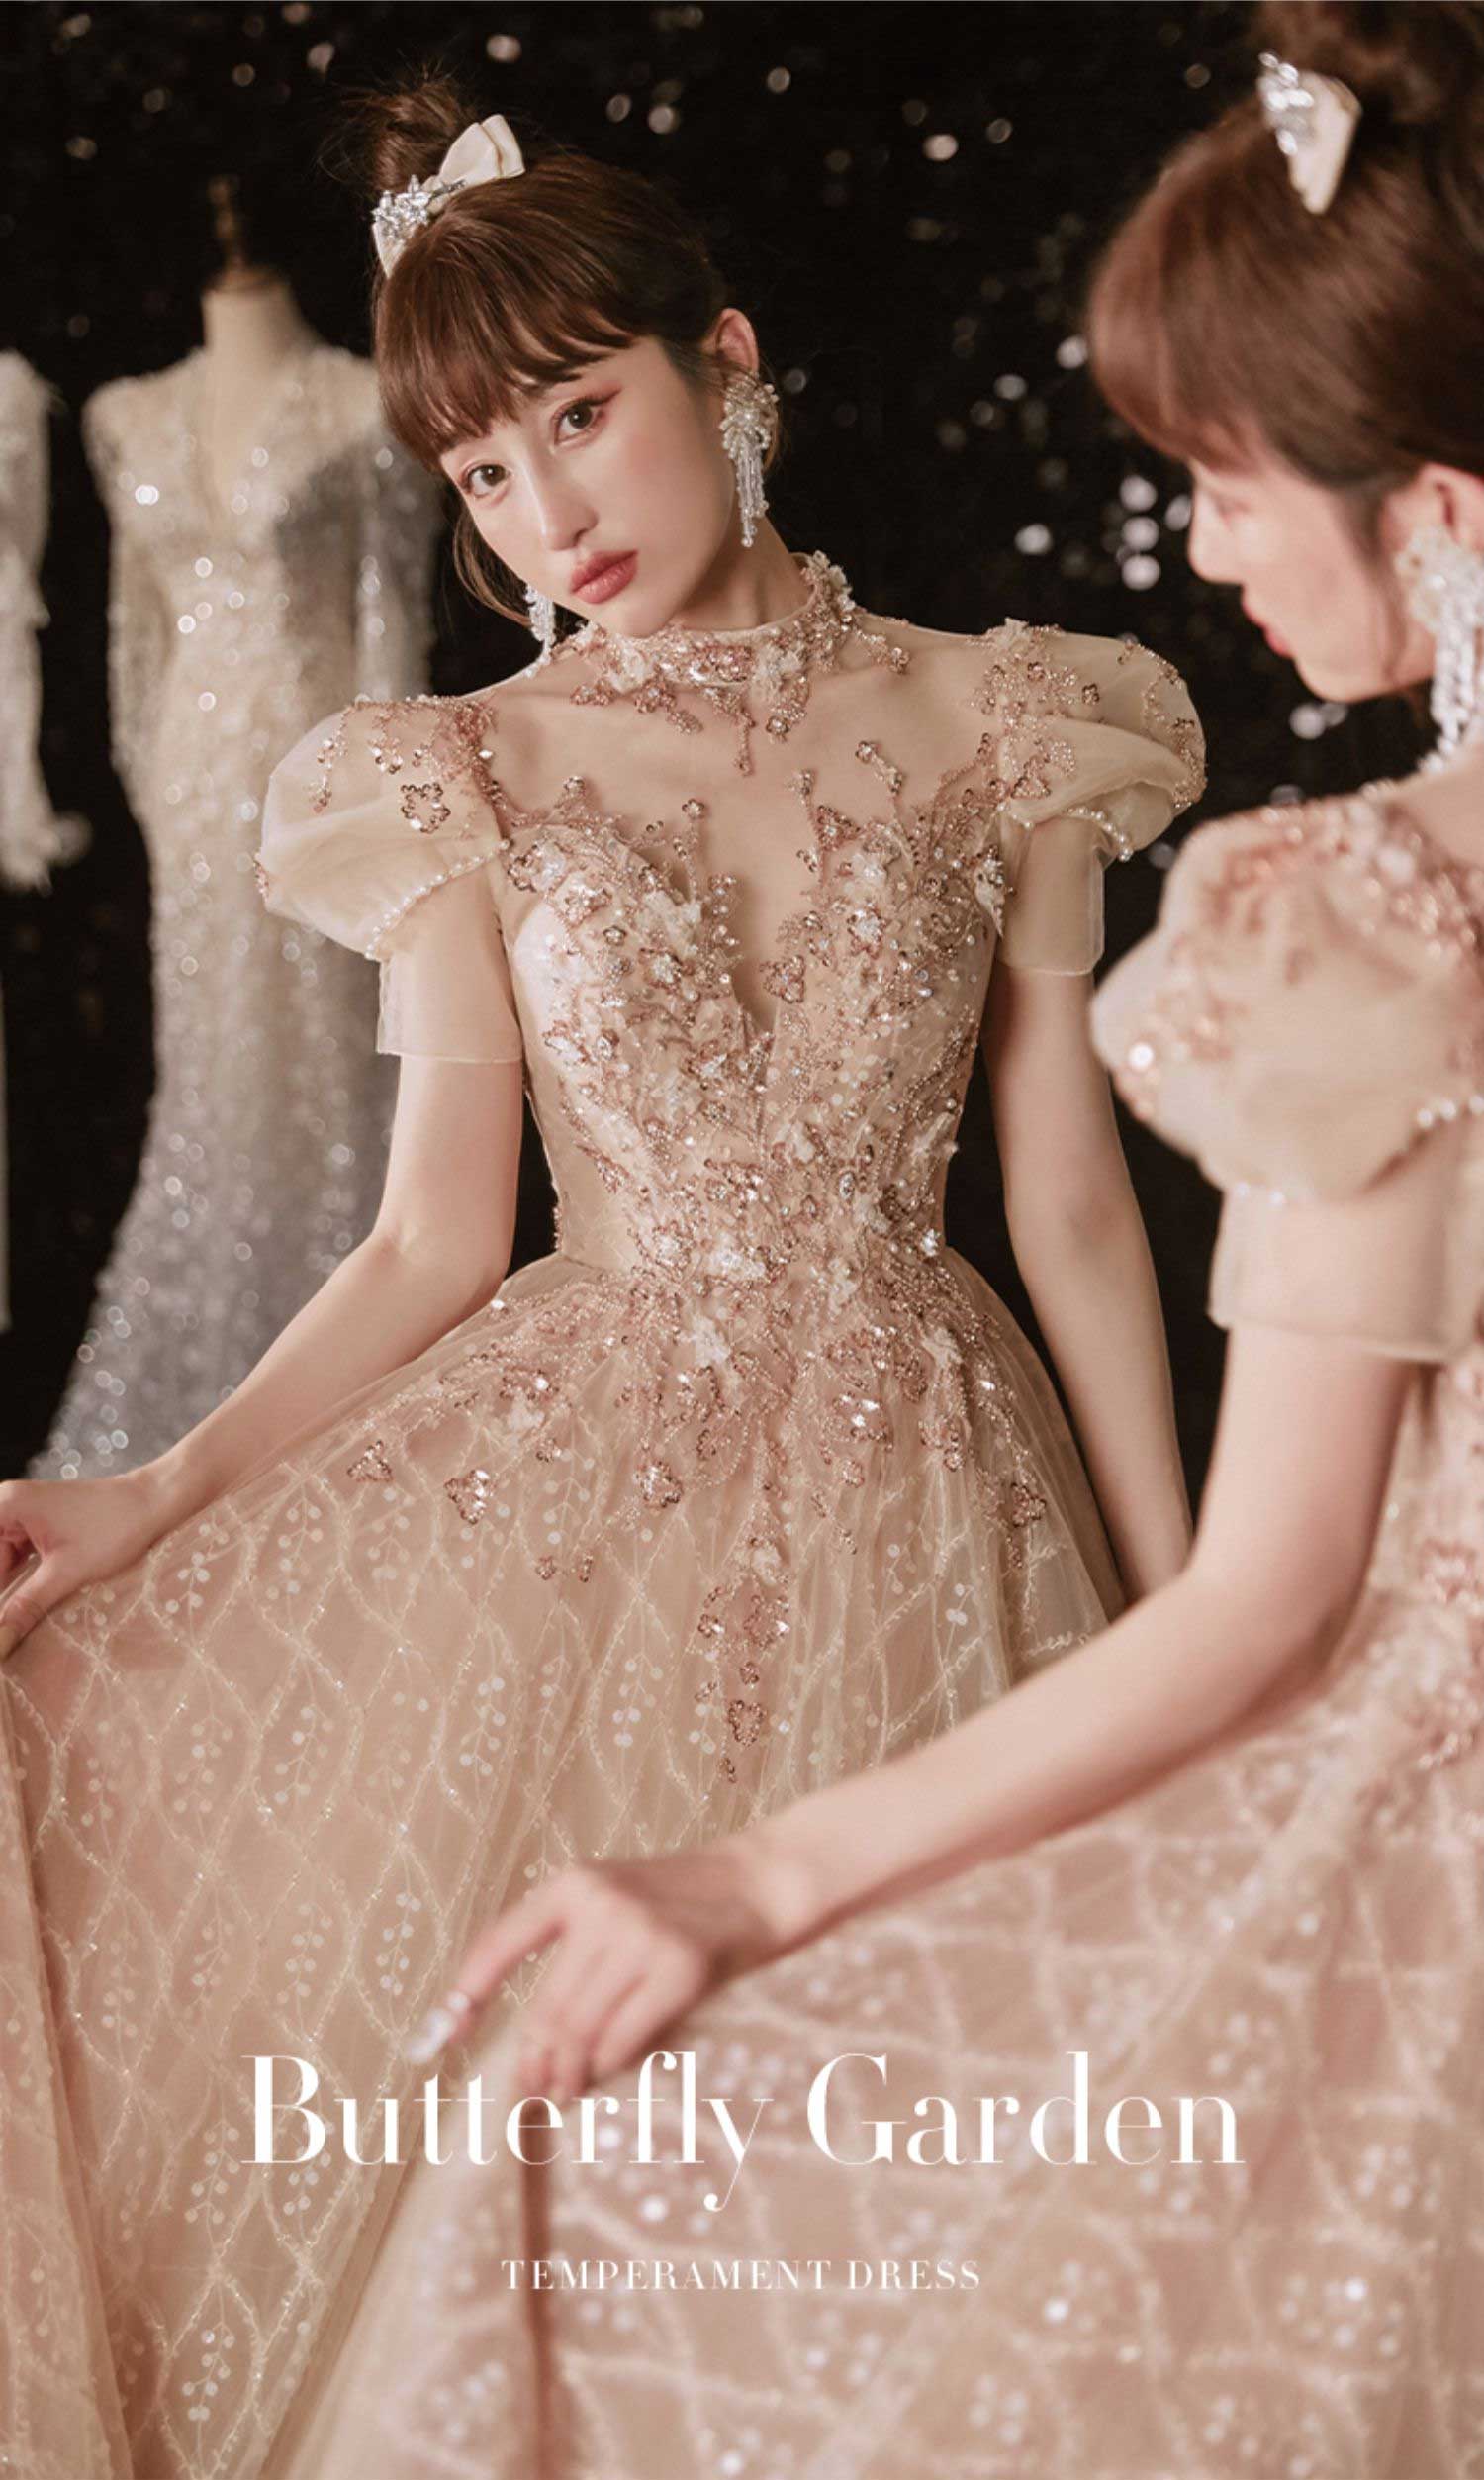 Luxury-Vintage-Cocktail-Party-Prom-Dress-Ball-Gown-Formal-Attire08